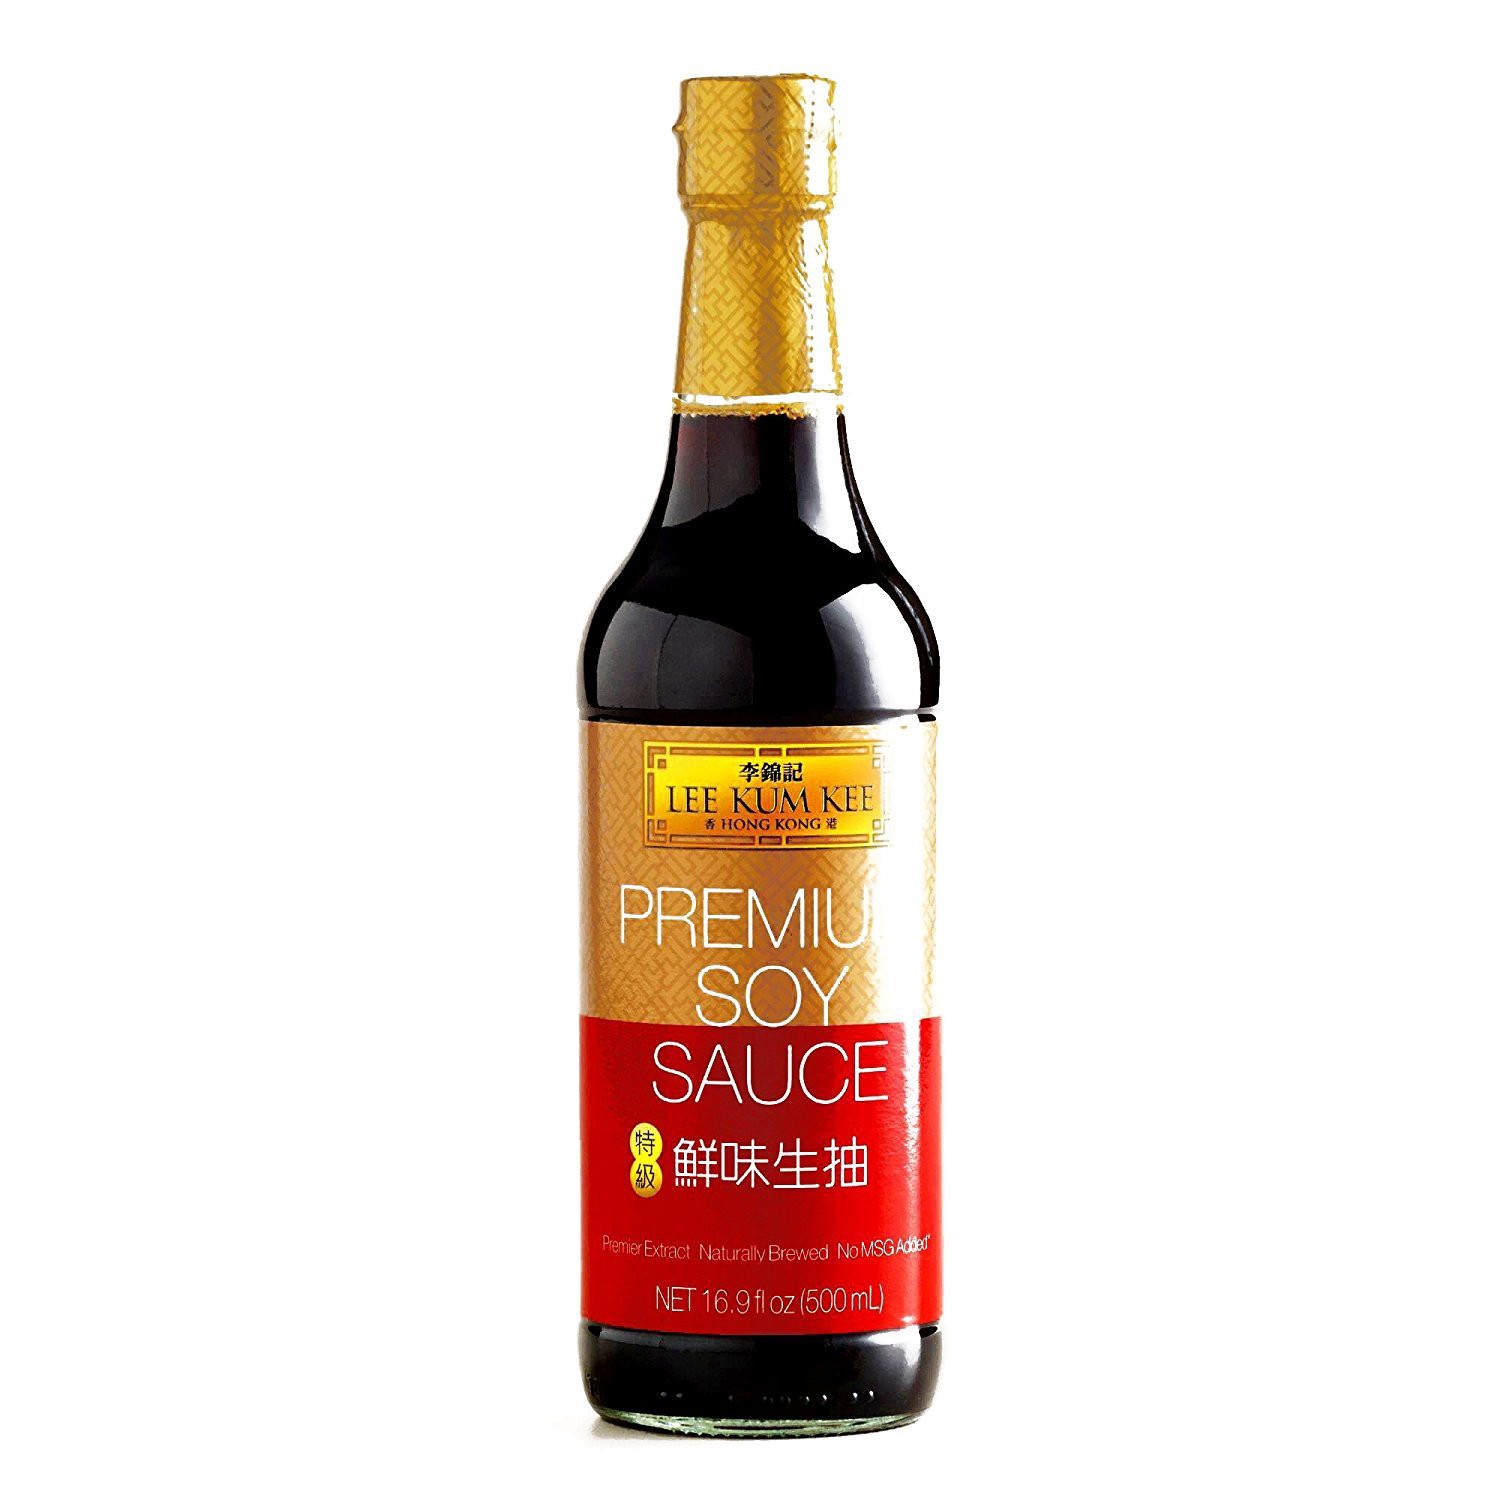 Best Soy Sauce for Sushi